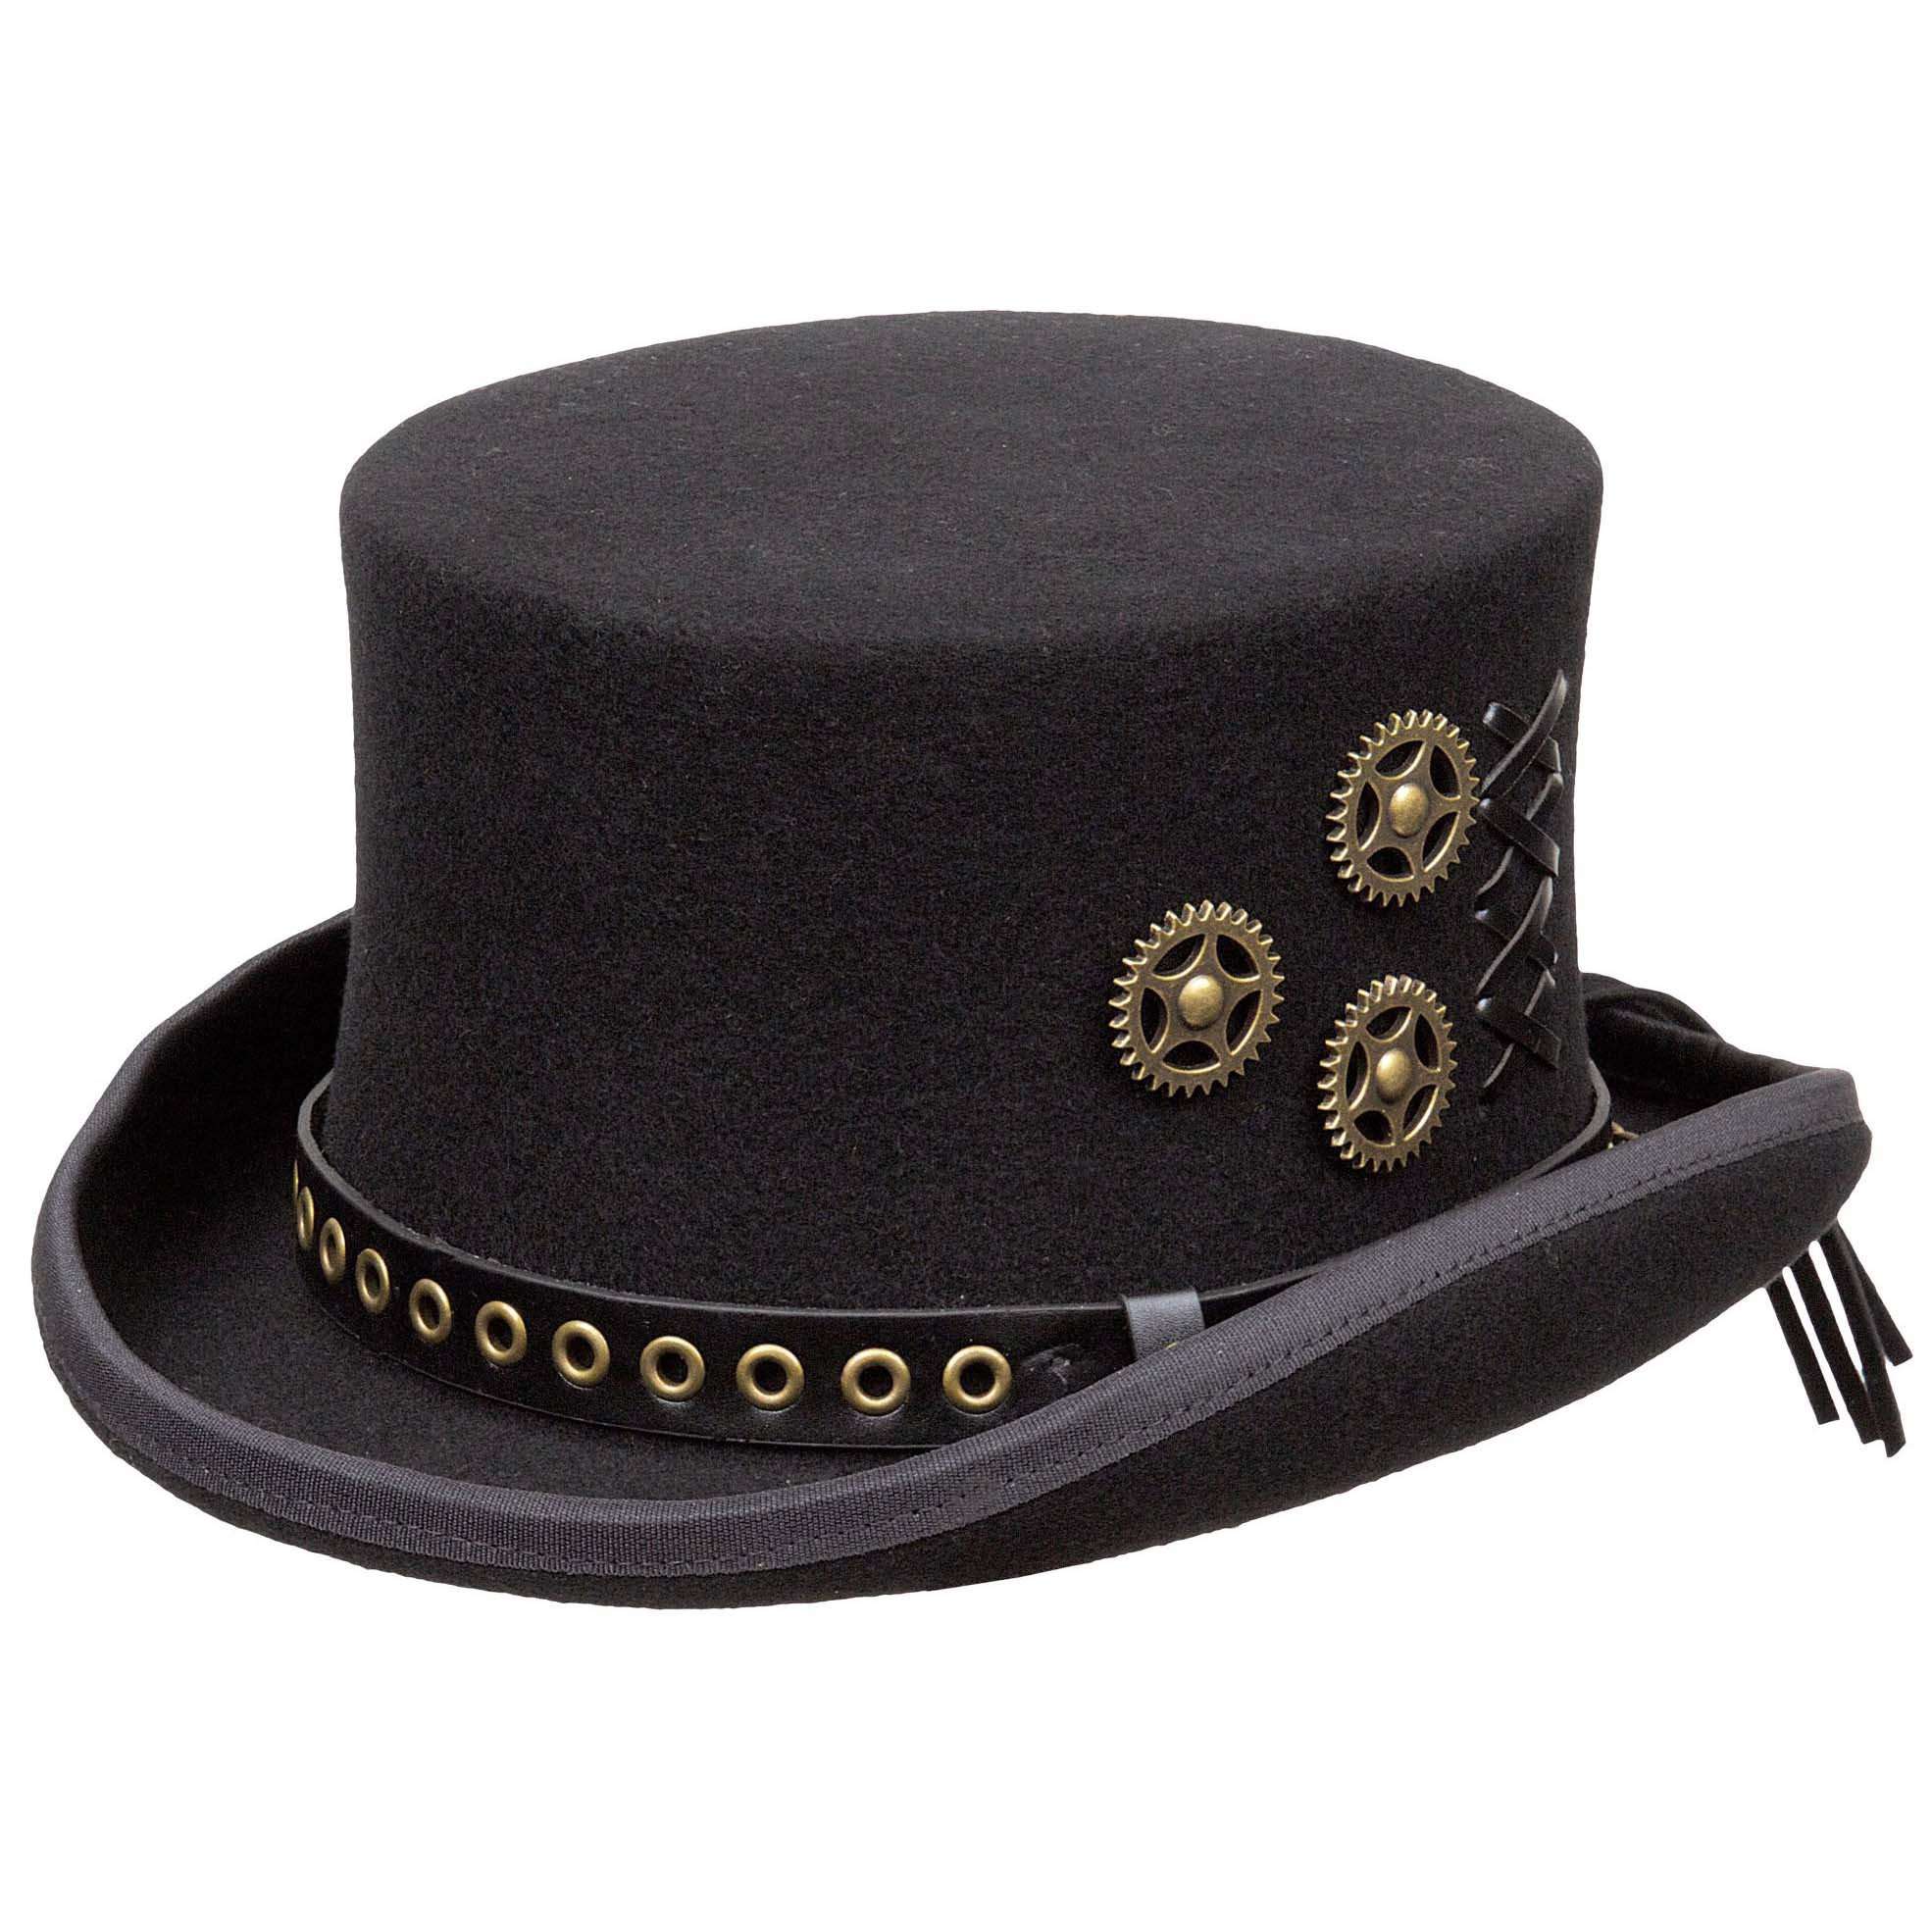 Steampunk Top Hat - K. Keith Top Hat Great hats by Karen Keith MWWF967-5M Black M 